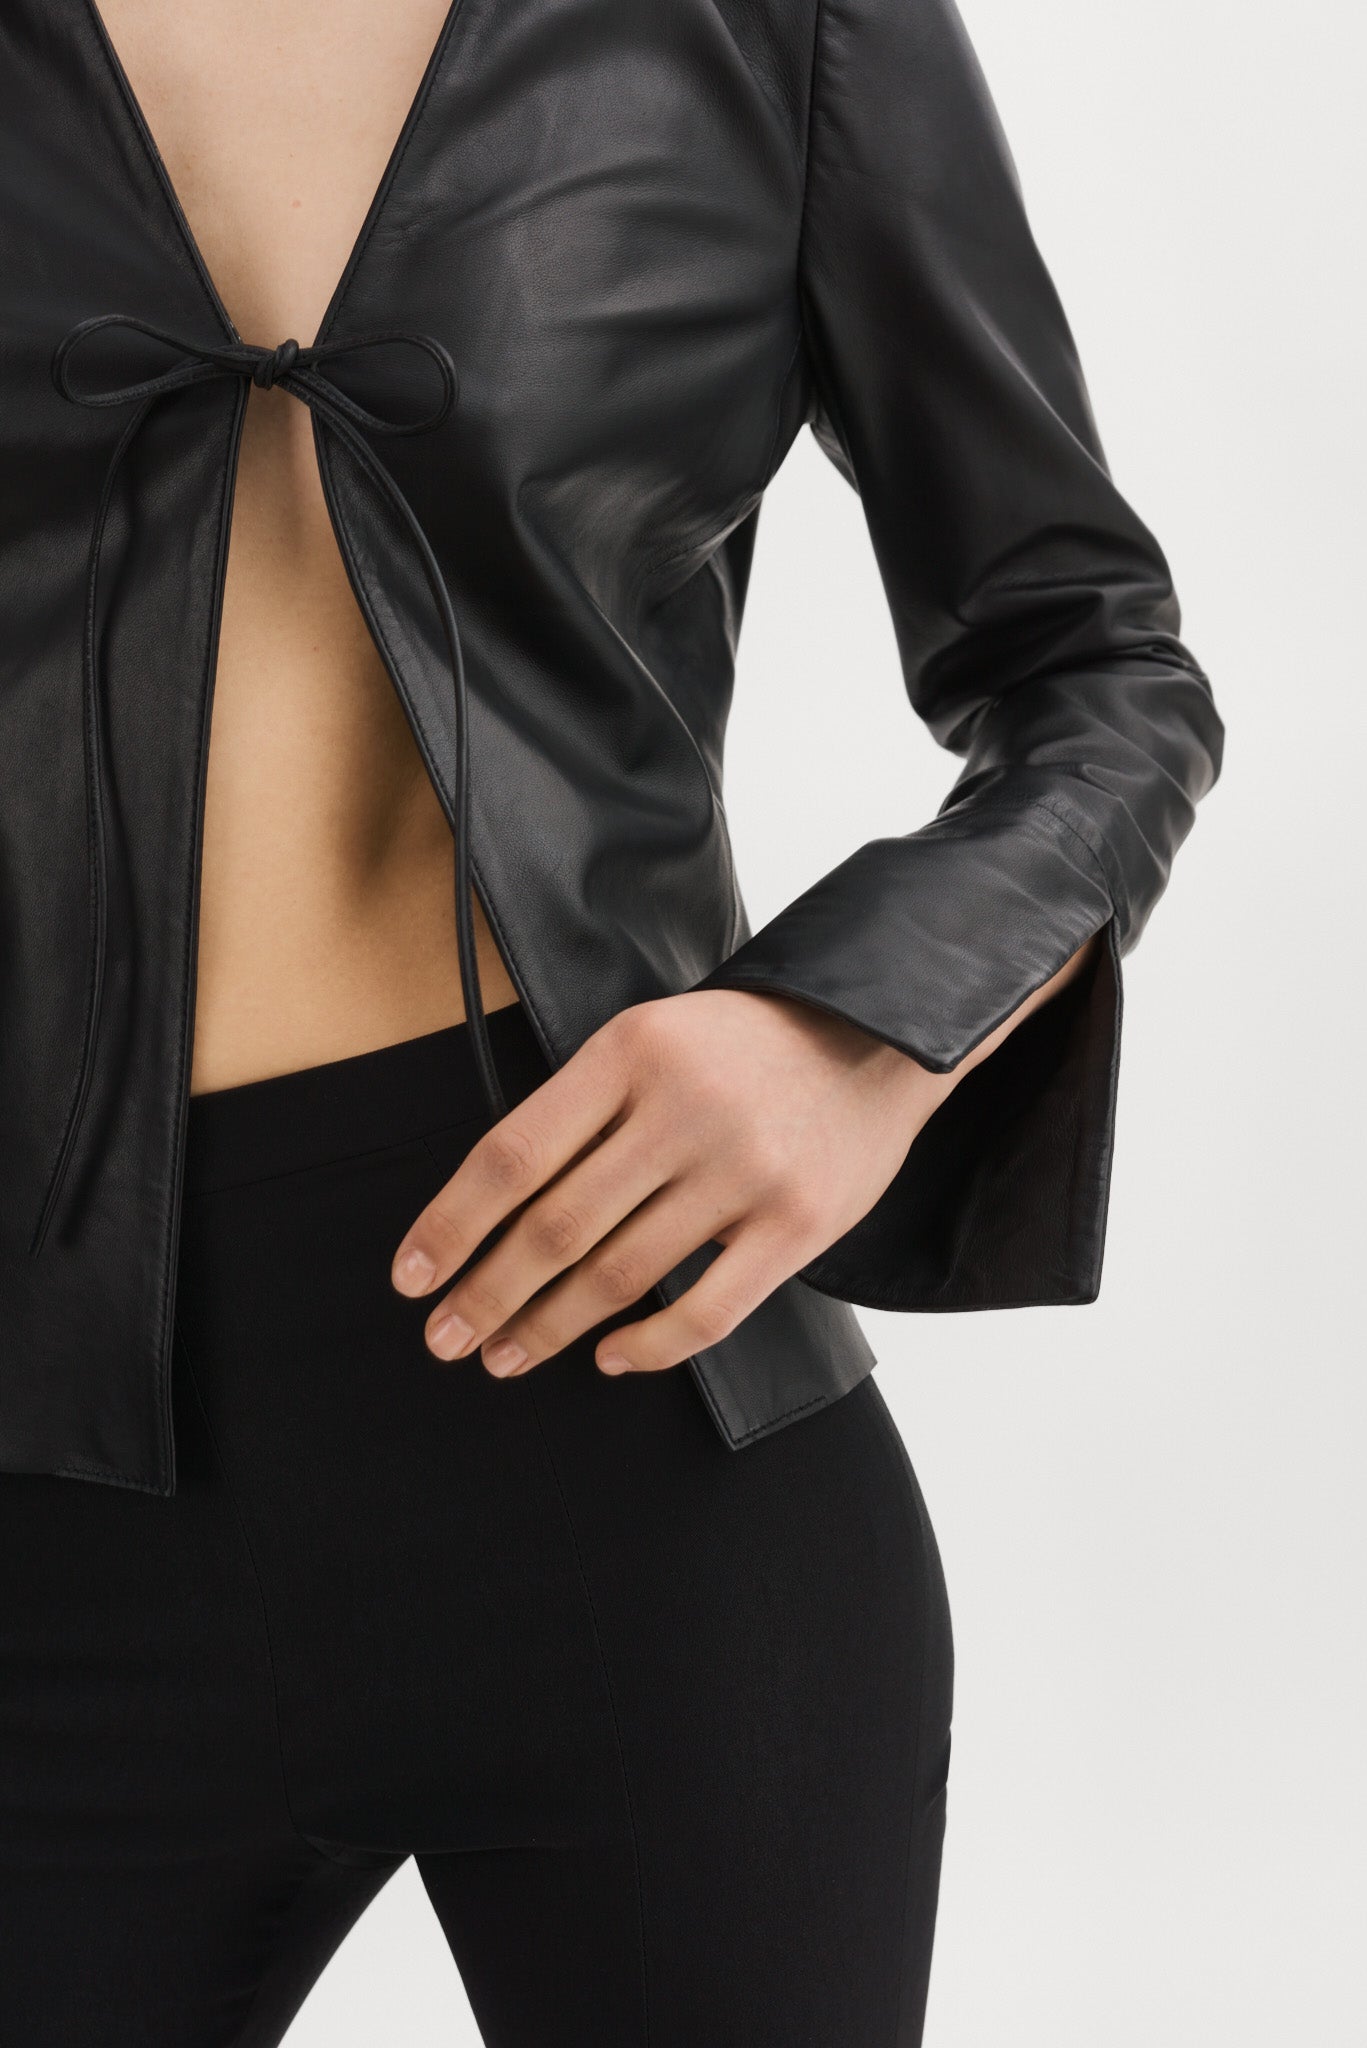 Lamarque- Sofia Fit Leather Shell Top- Black - Dukes Online